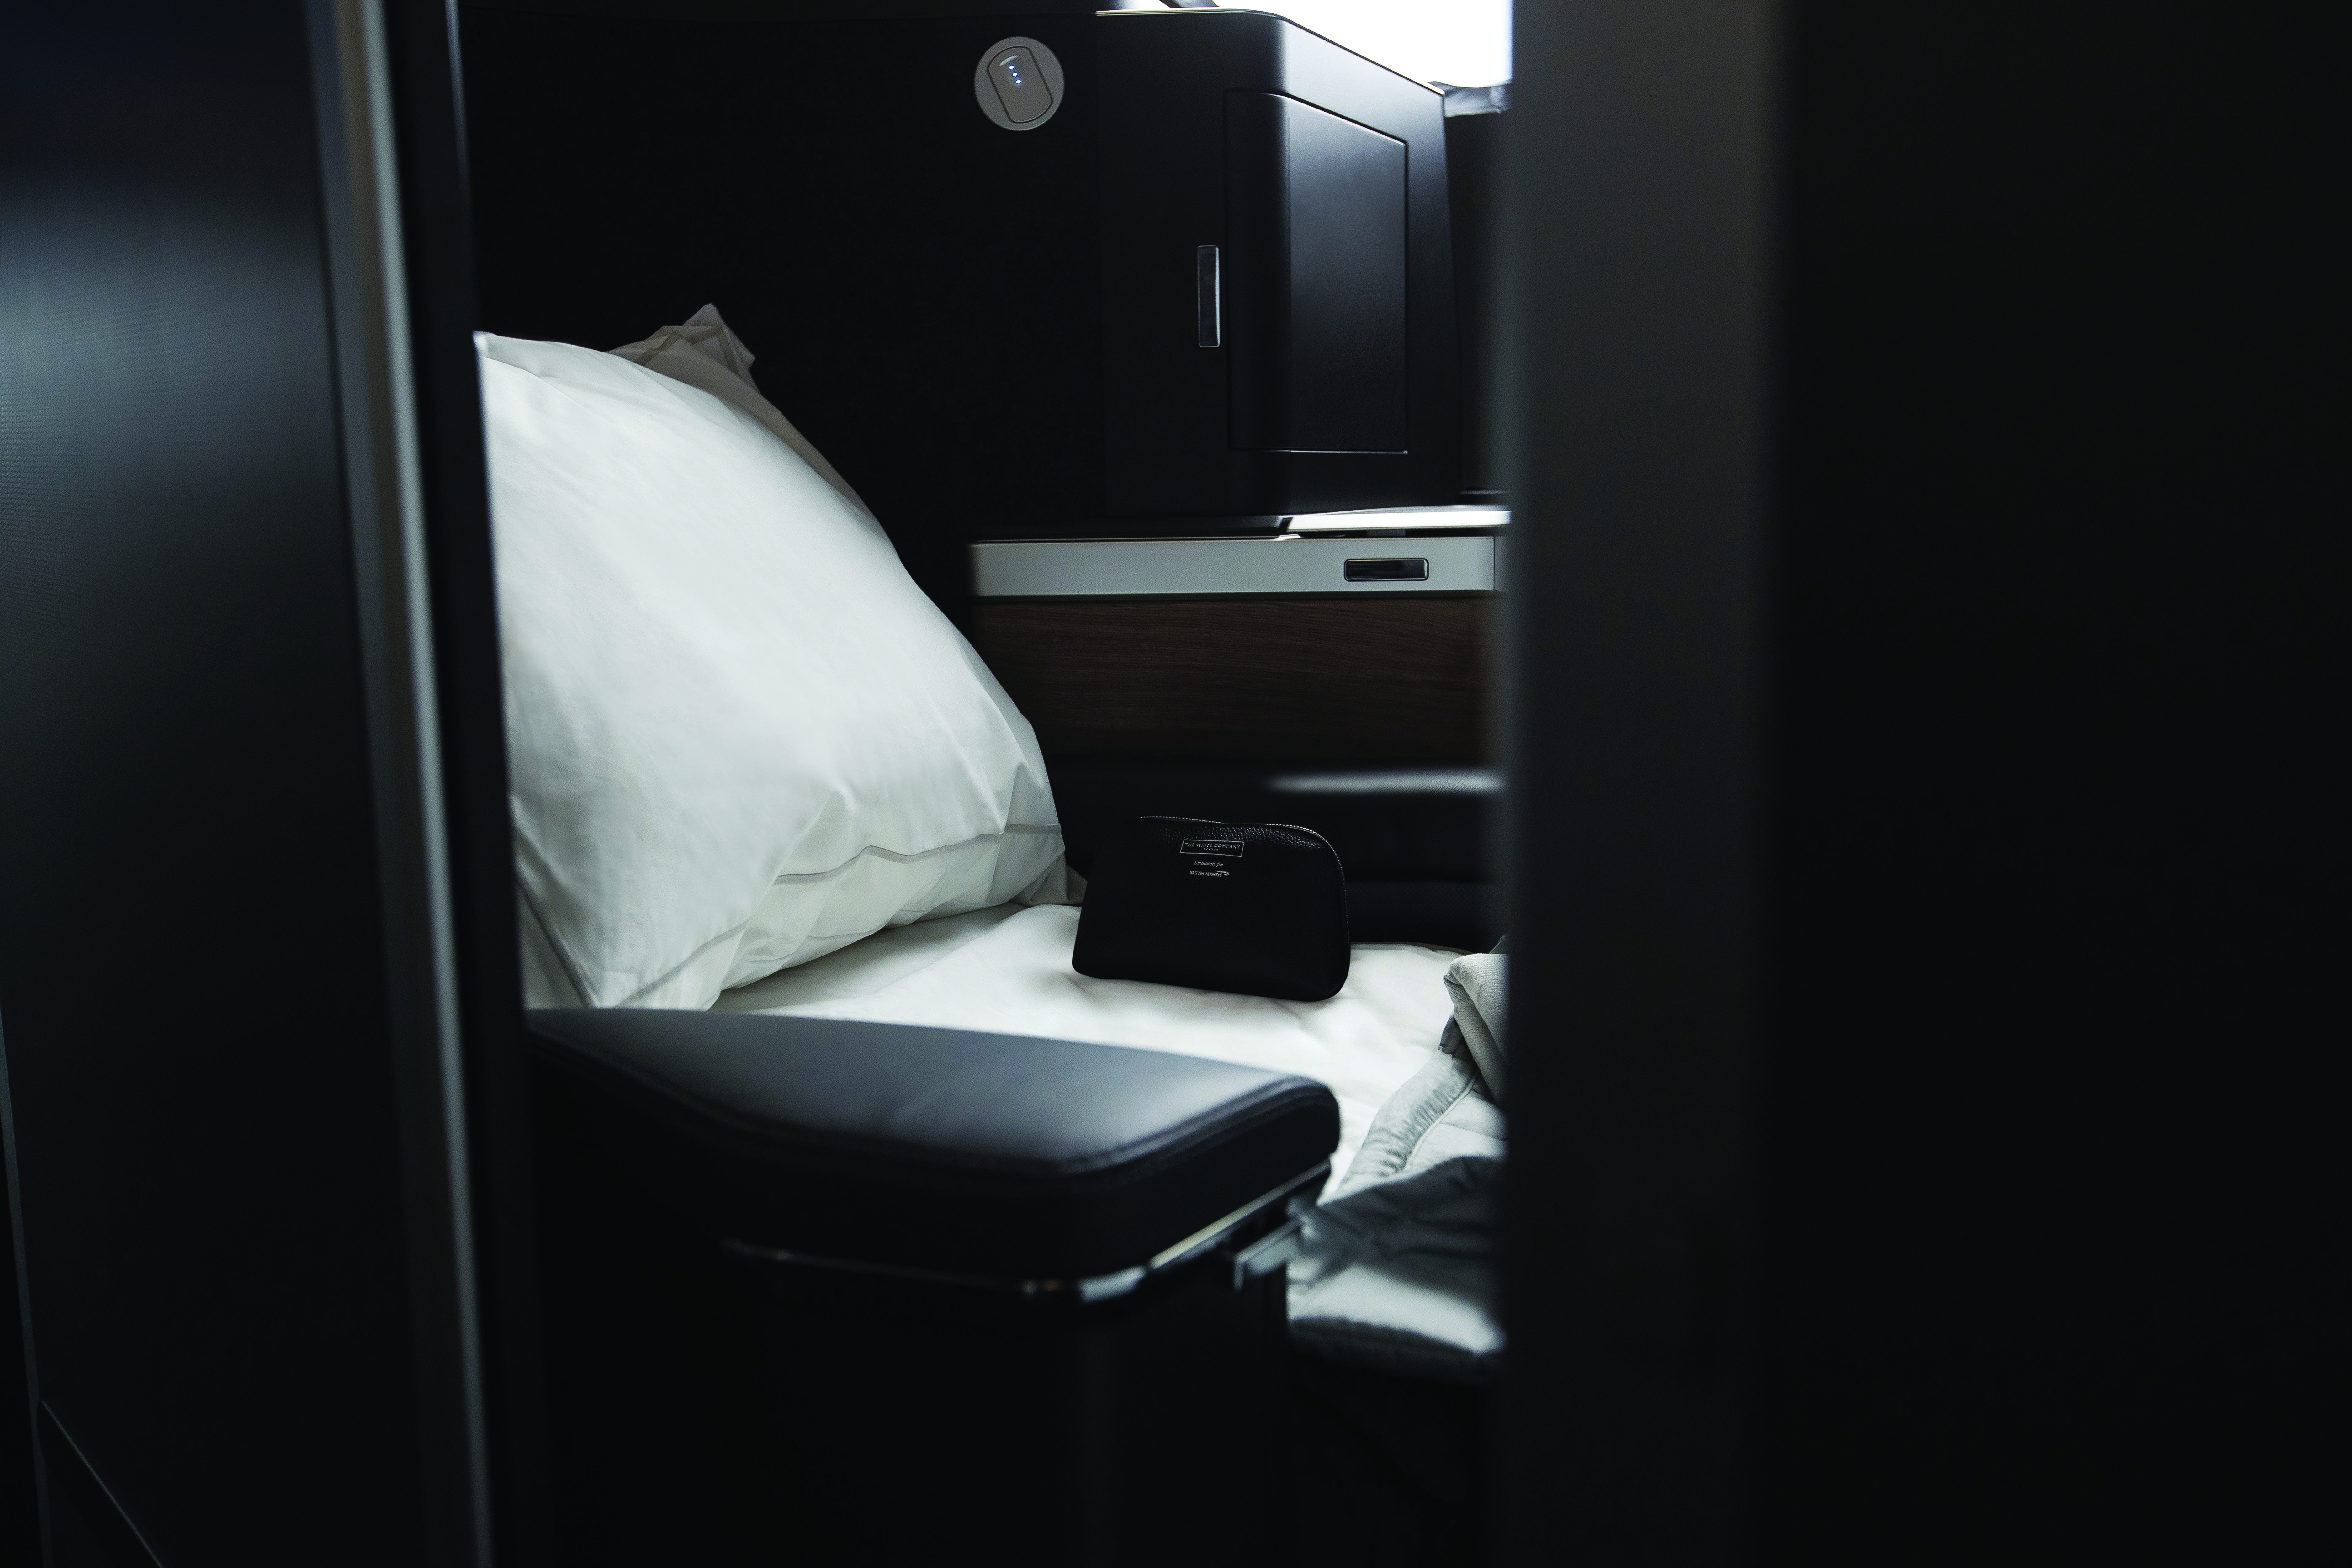 The design features a personal door for more privacy (British Airways/PA)